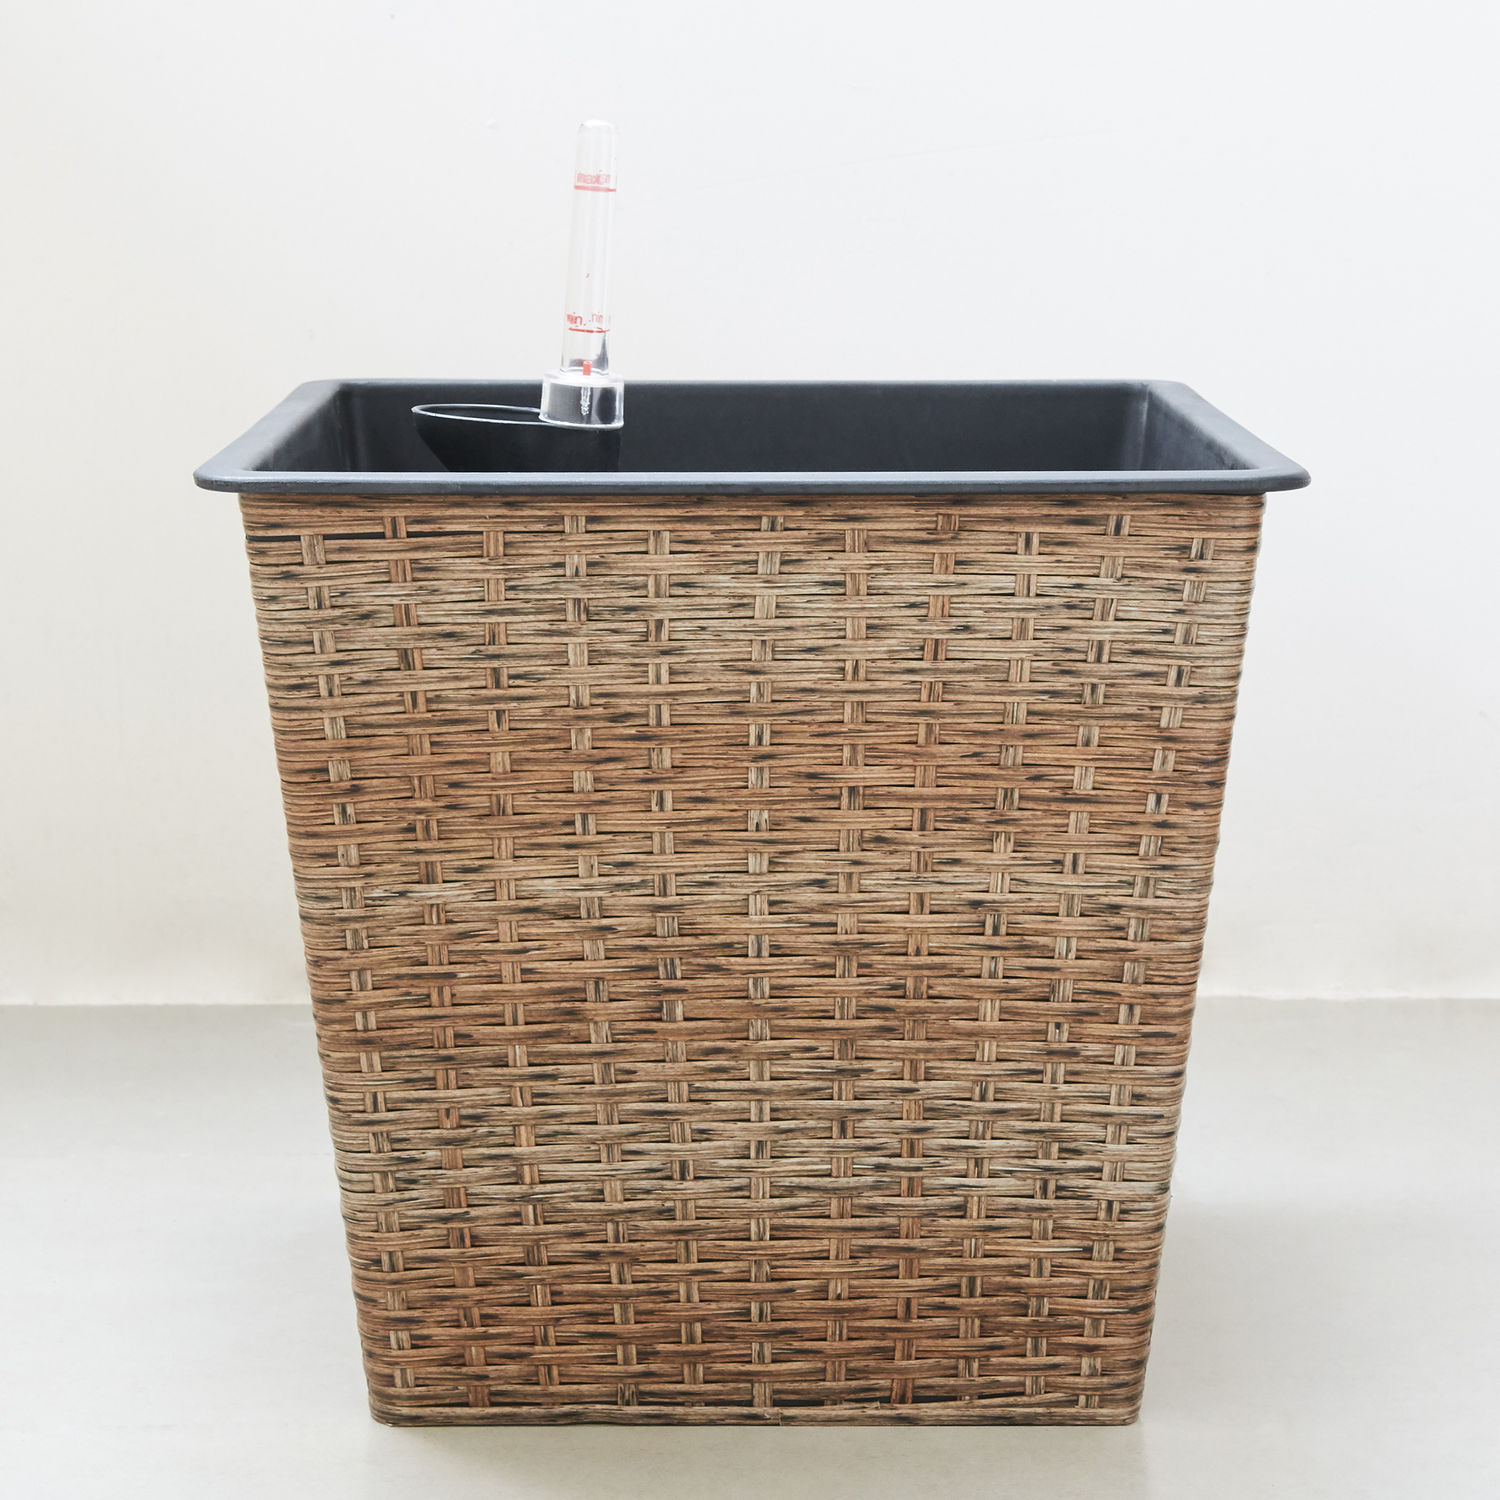 Hatteras 13 x 13 x 12 Thin Square Wicker Smart Self-Watering Planter in Light Brown